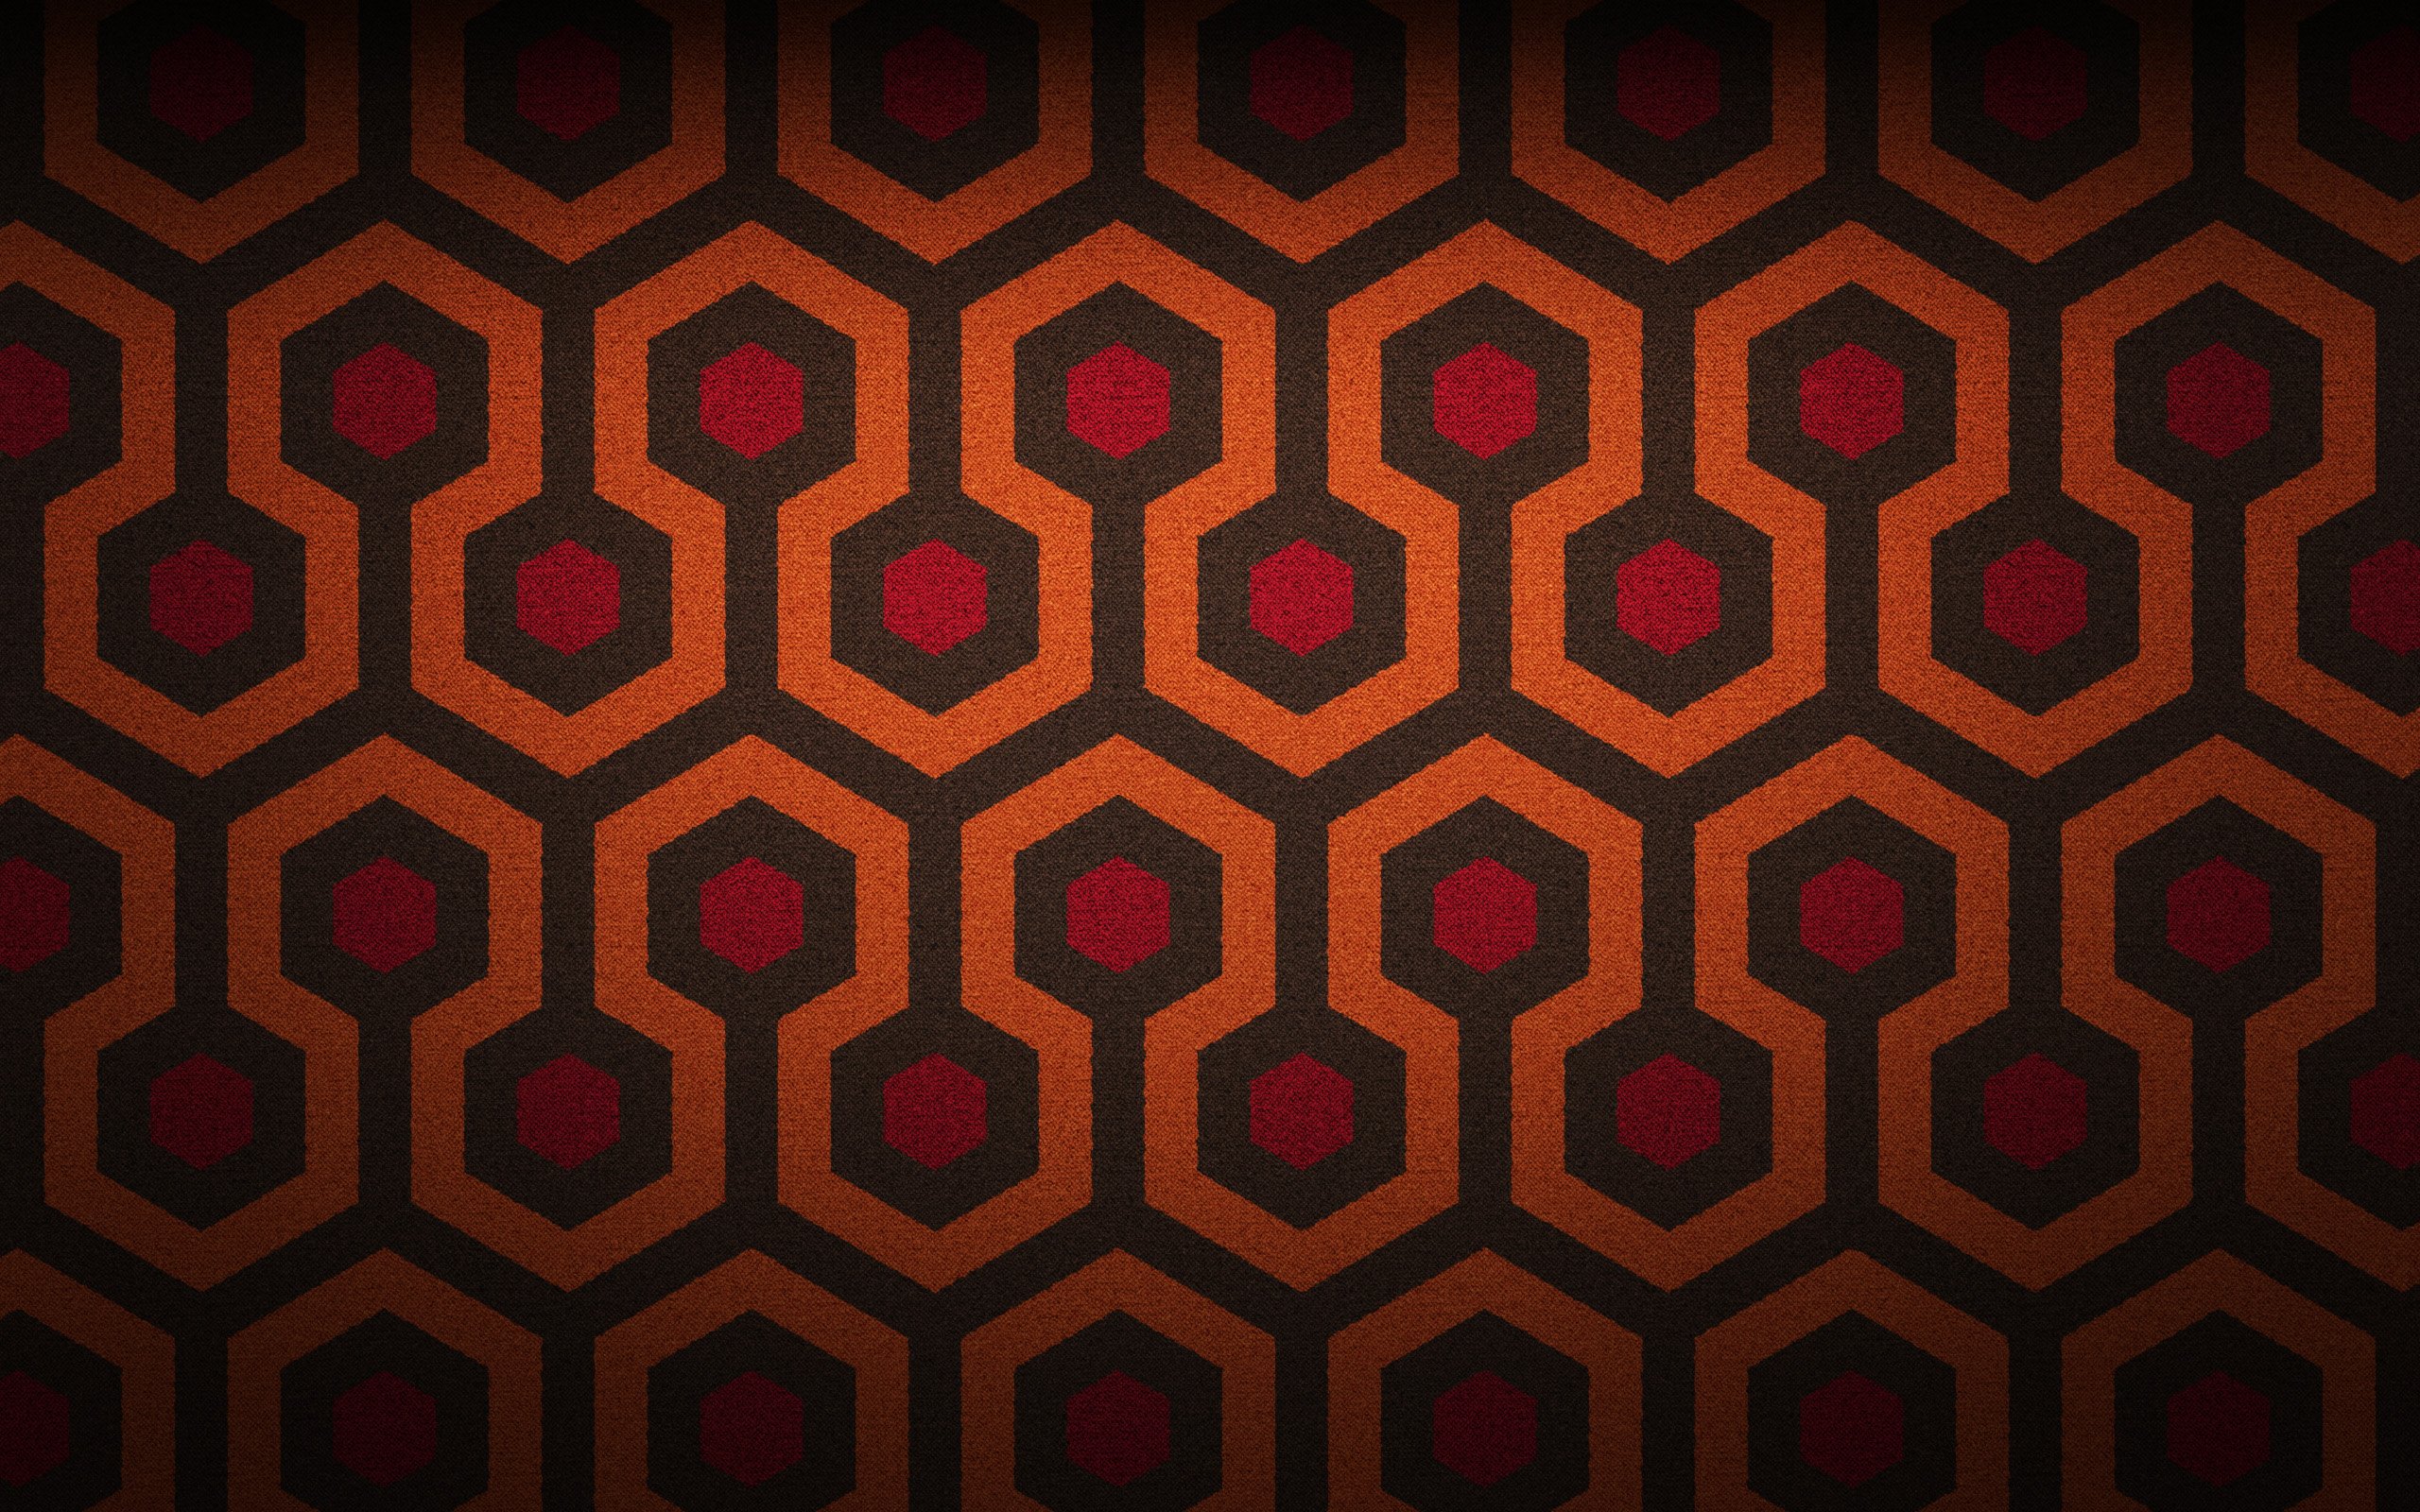 abstract, Minimalistic, Design, Patterns, The, Shining, Carpet Wallpaper